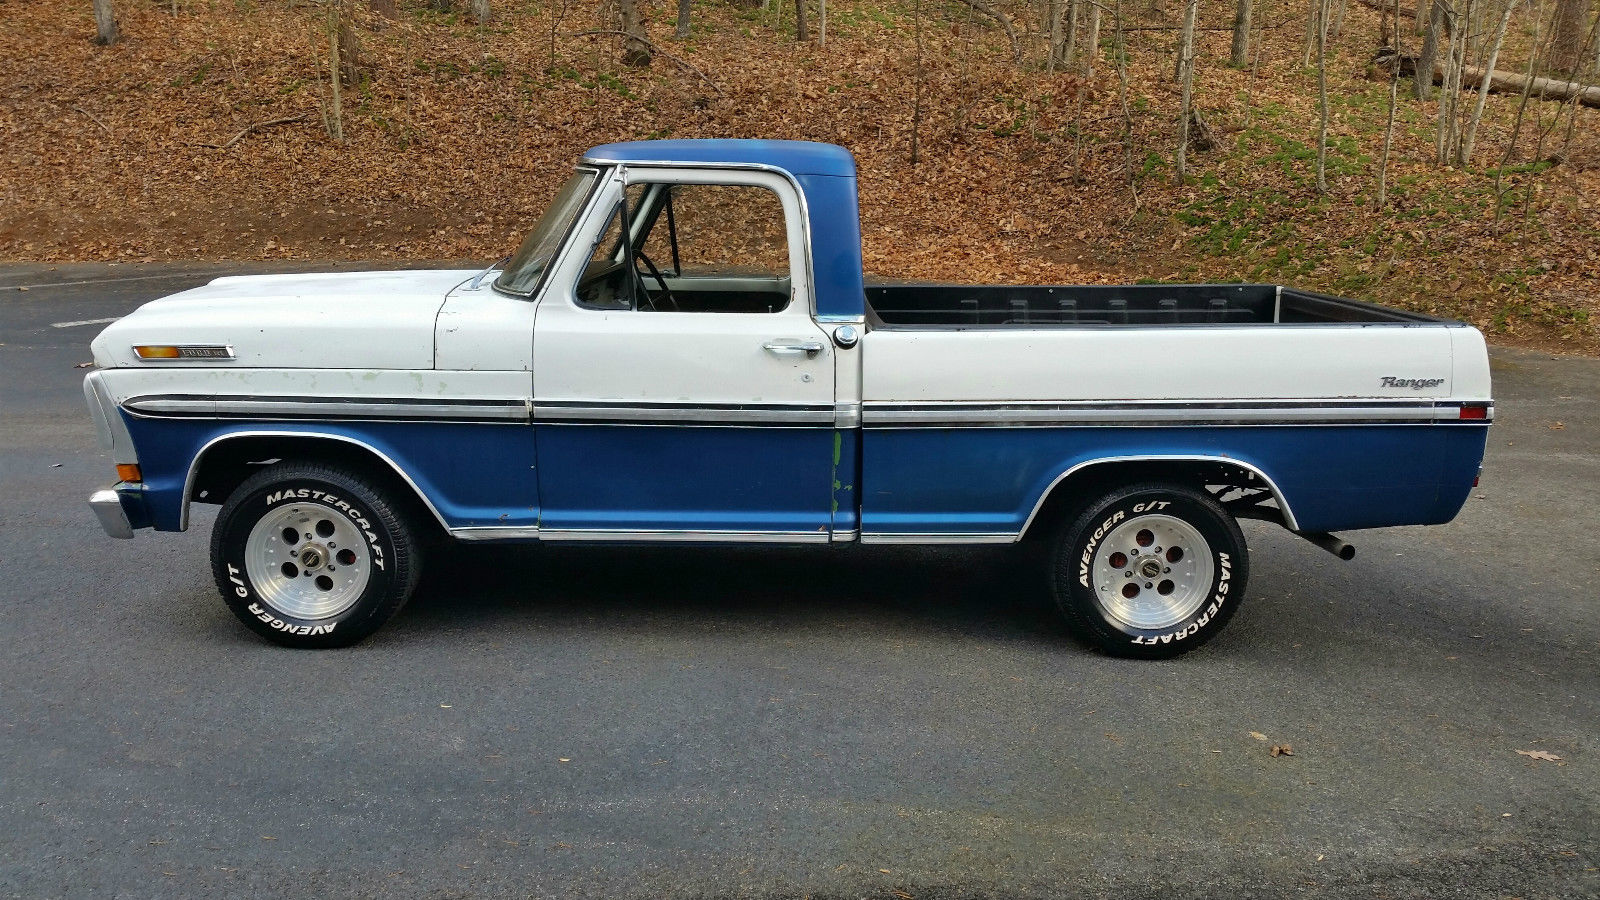 72 FORD RANGER F100 SHORTBED 70 MUSTANG 351W 4 SPEED POWER STEERING 67 ...